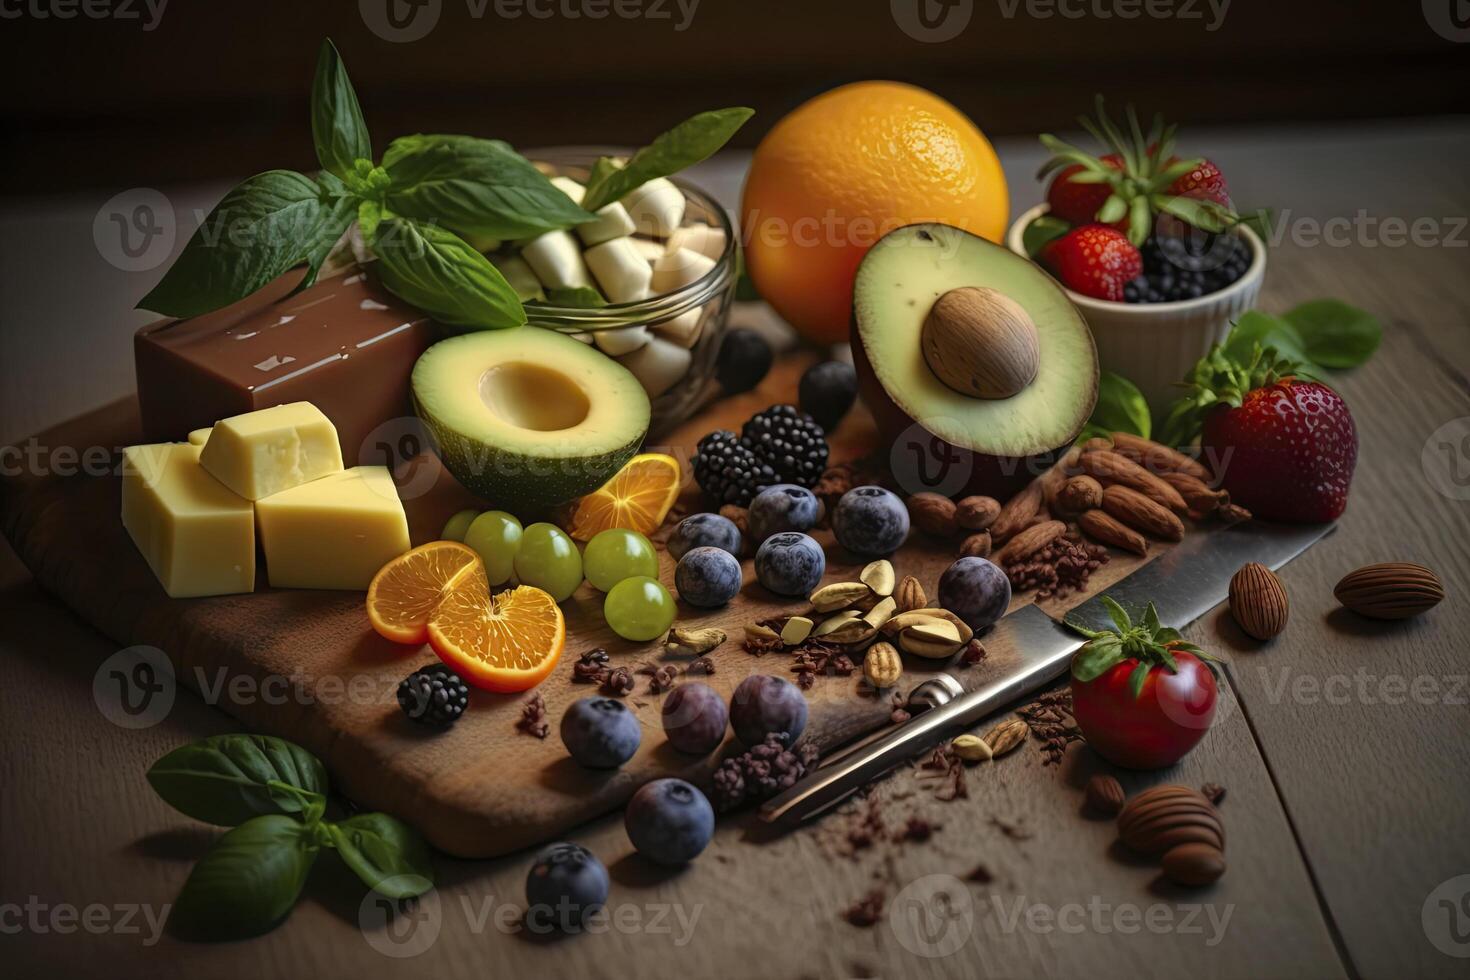 The selection of healthy and clean foods. photo